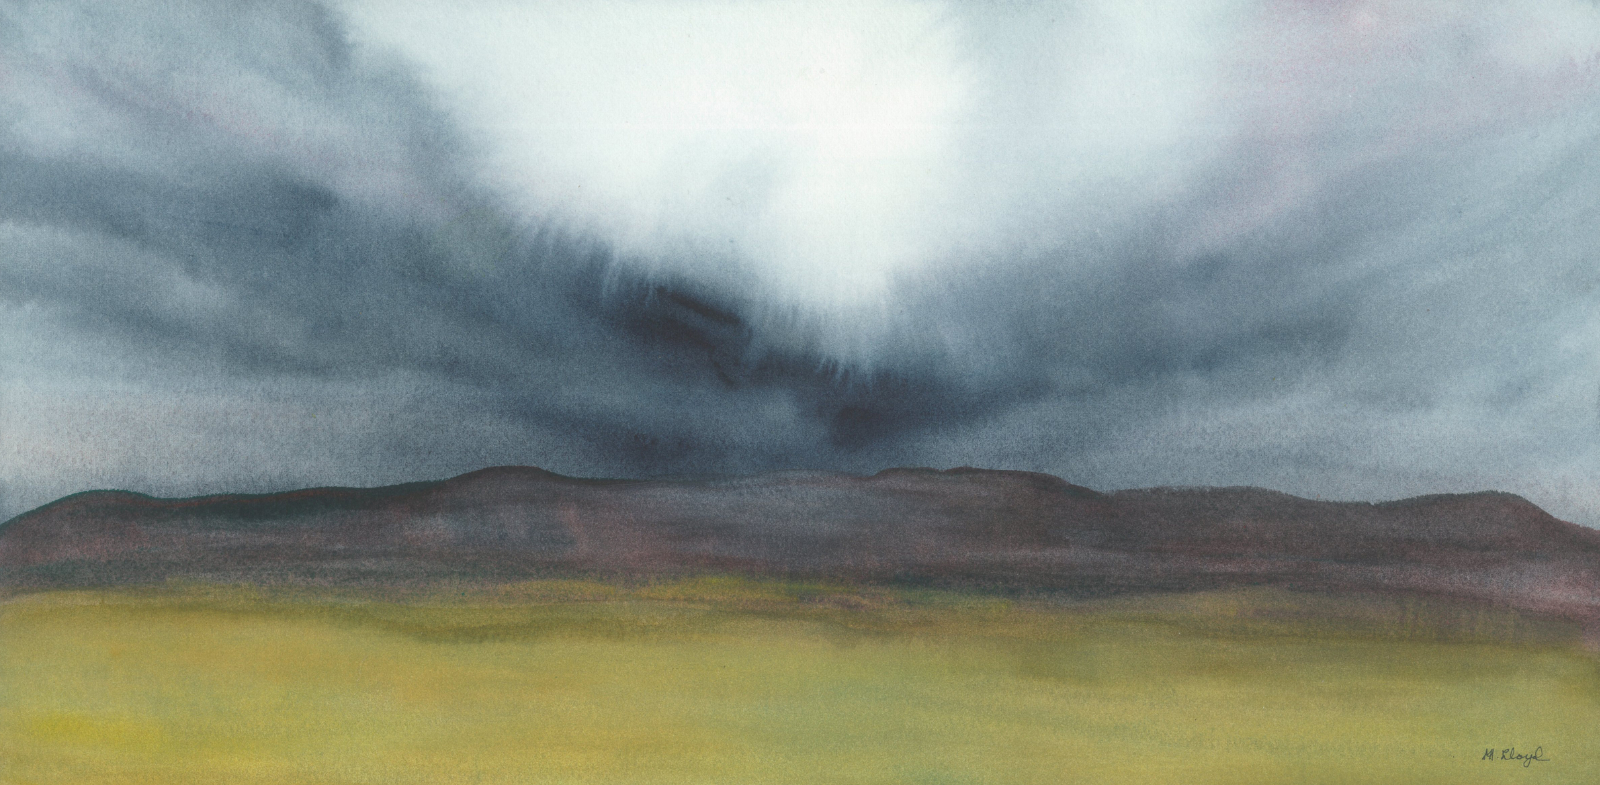 watercolor of a wide flat field and hills with the sun breaking through the clouds in the center